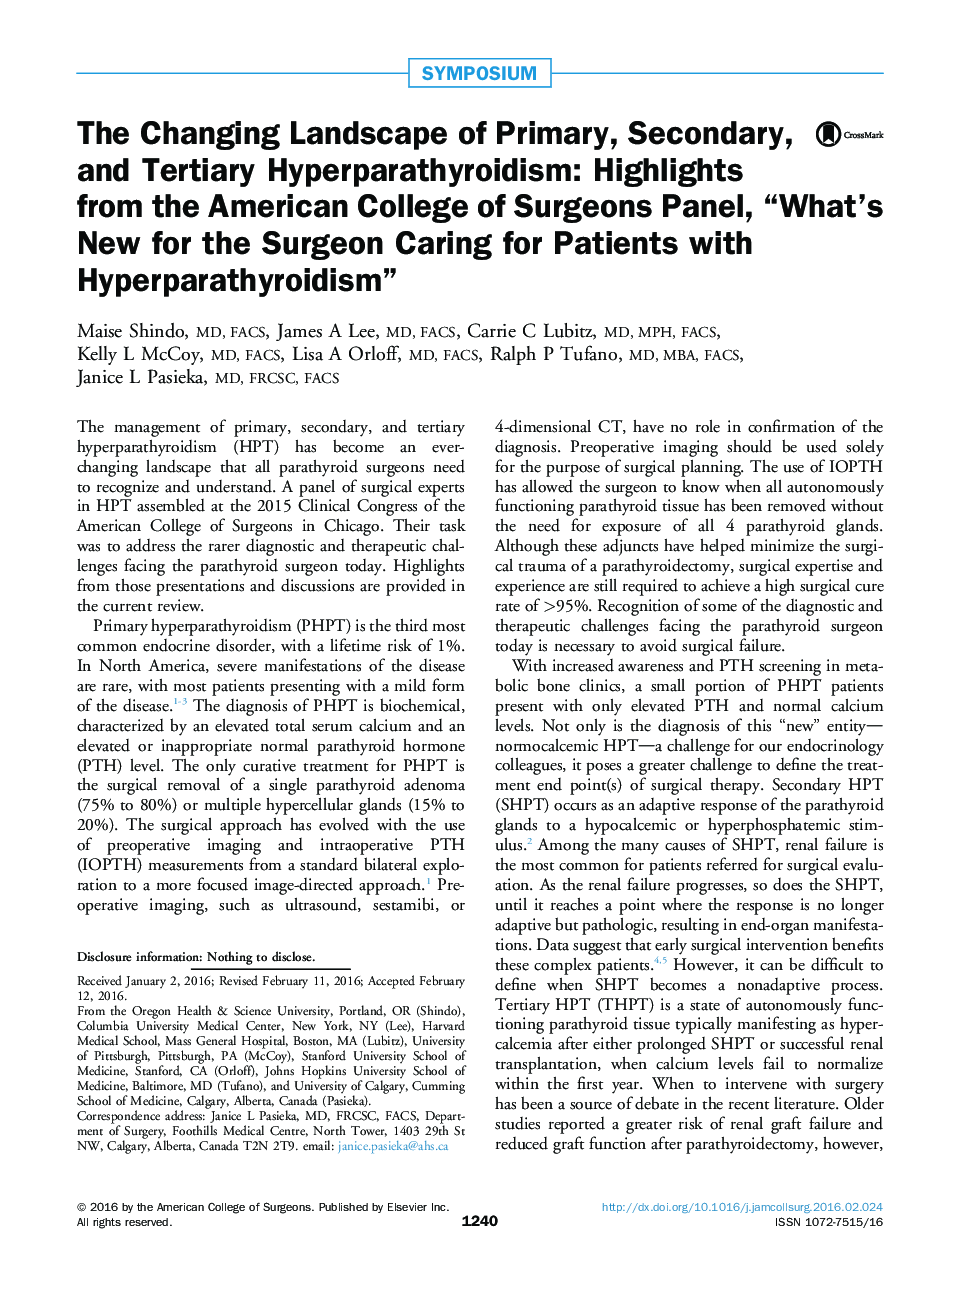 The Changing Landscape of Primary, Secondary, and Tertiary Hyperparathyroidism: Highlights from the American College of Surgeons Panel, “What's New for the Surgeon Caring for Patients with Hyperparathyroidism”